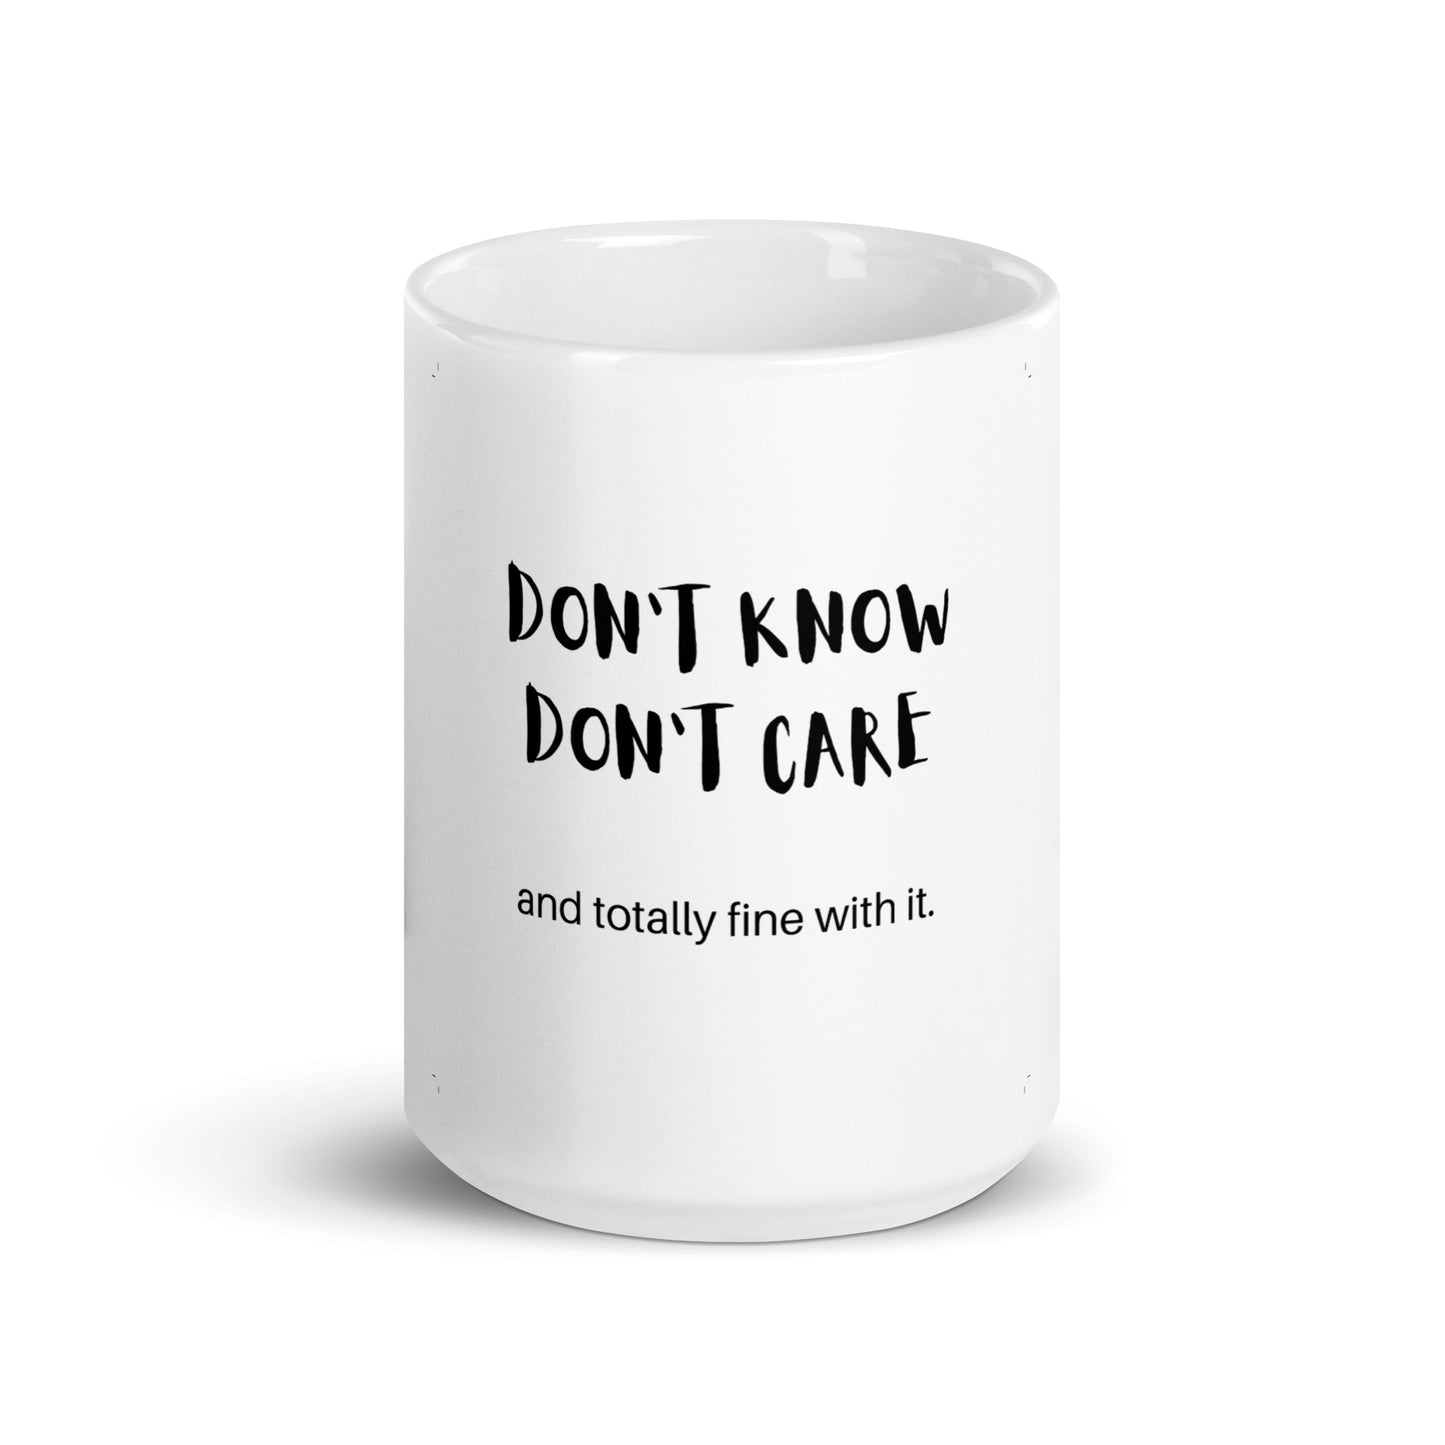 Don't Know Don't Care - White glossy mug